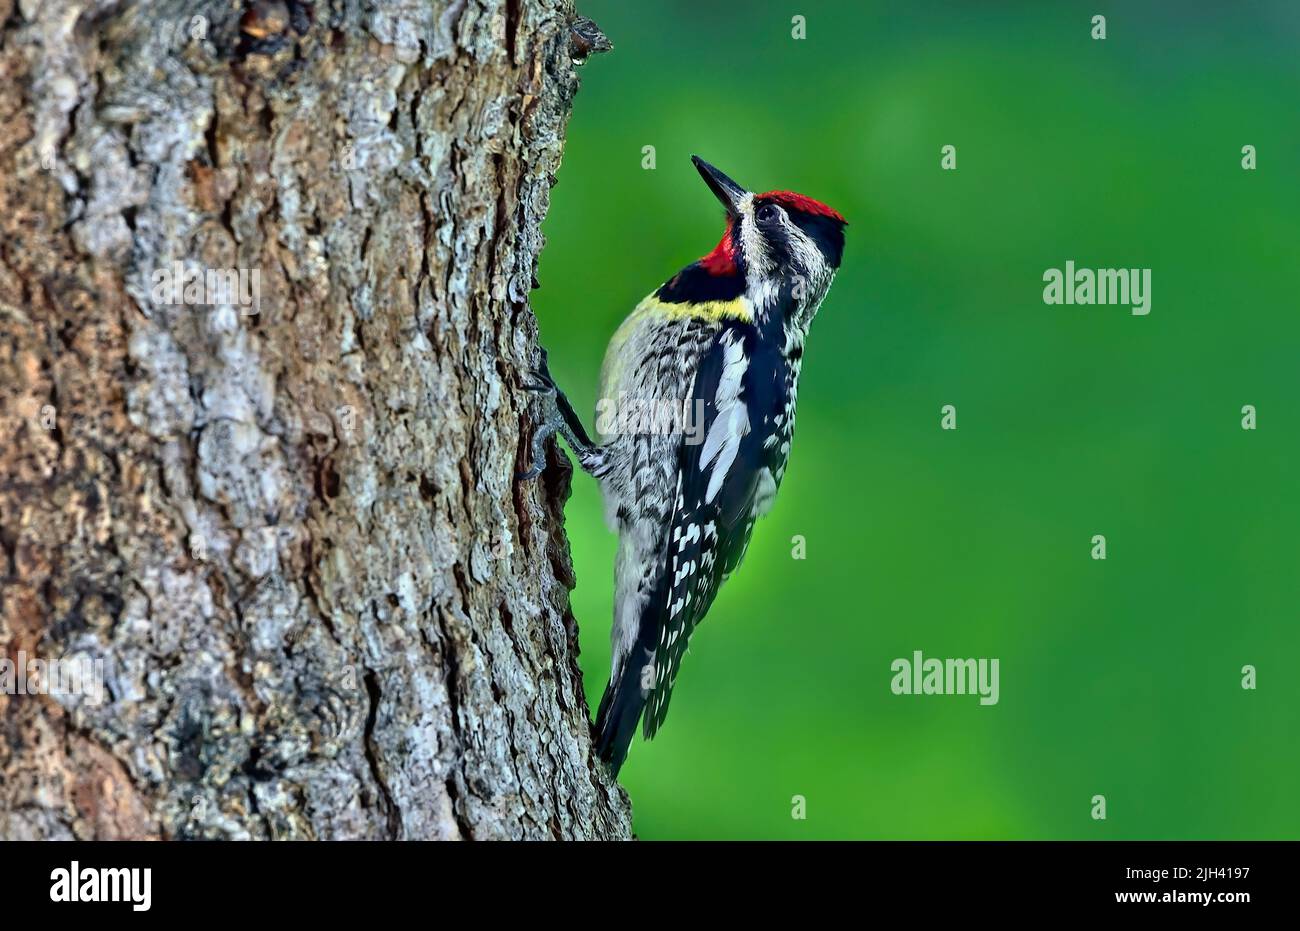 A wild Yellow-bellied Sapsucker foraging on a spruce tree trunk in rural Alberta Canada. Stock Photo